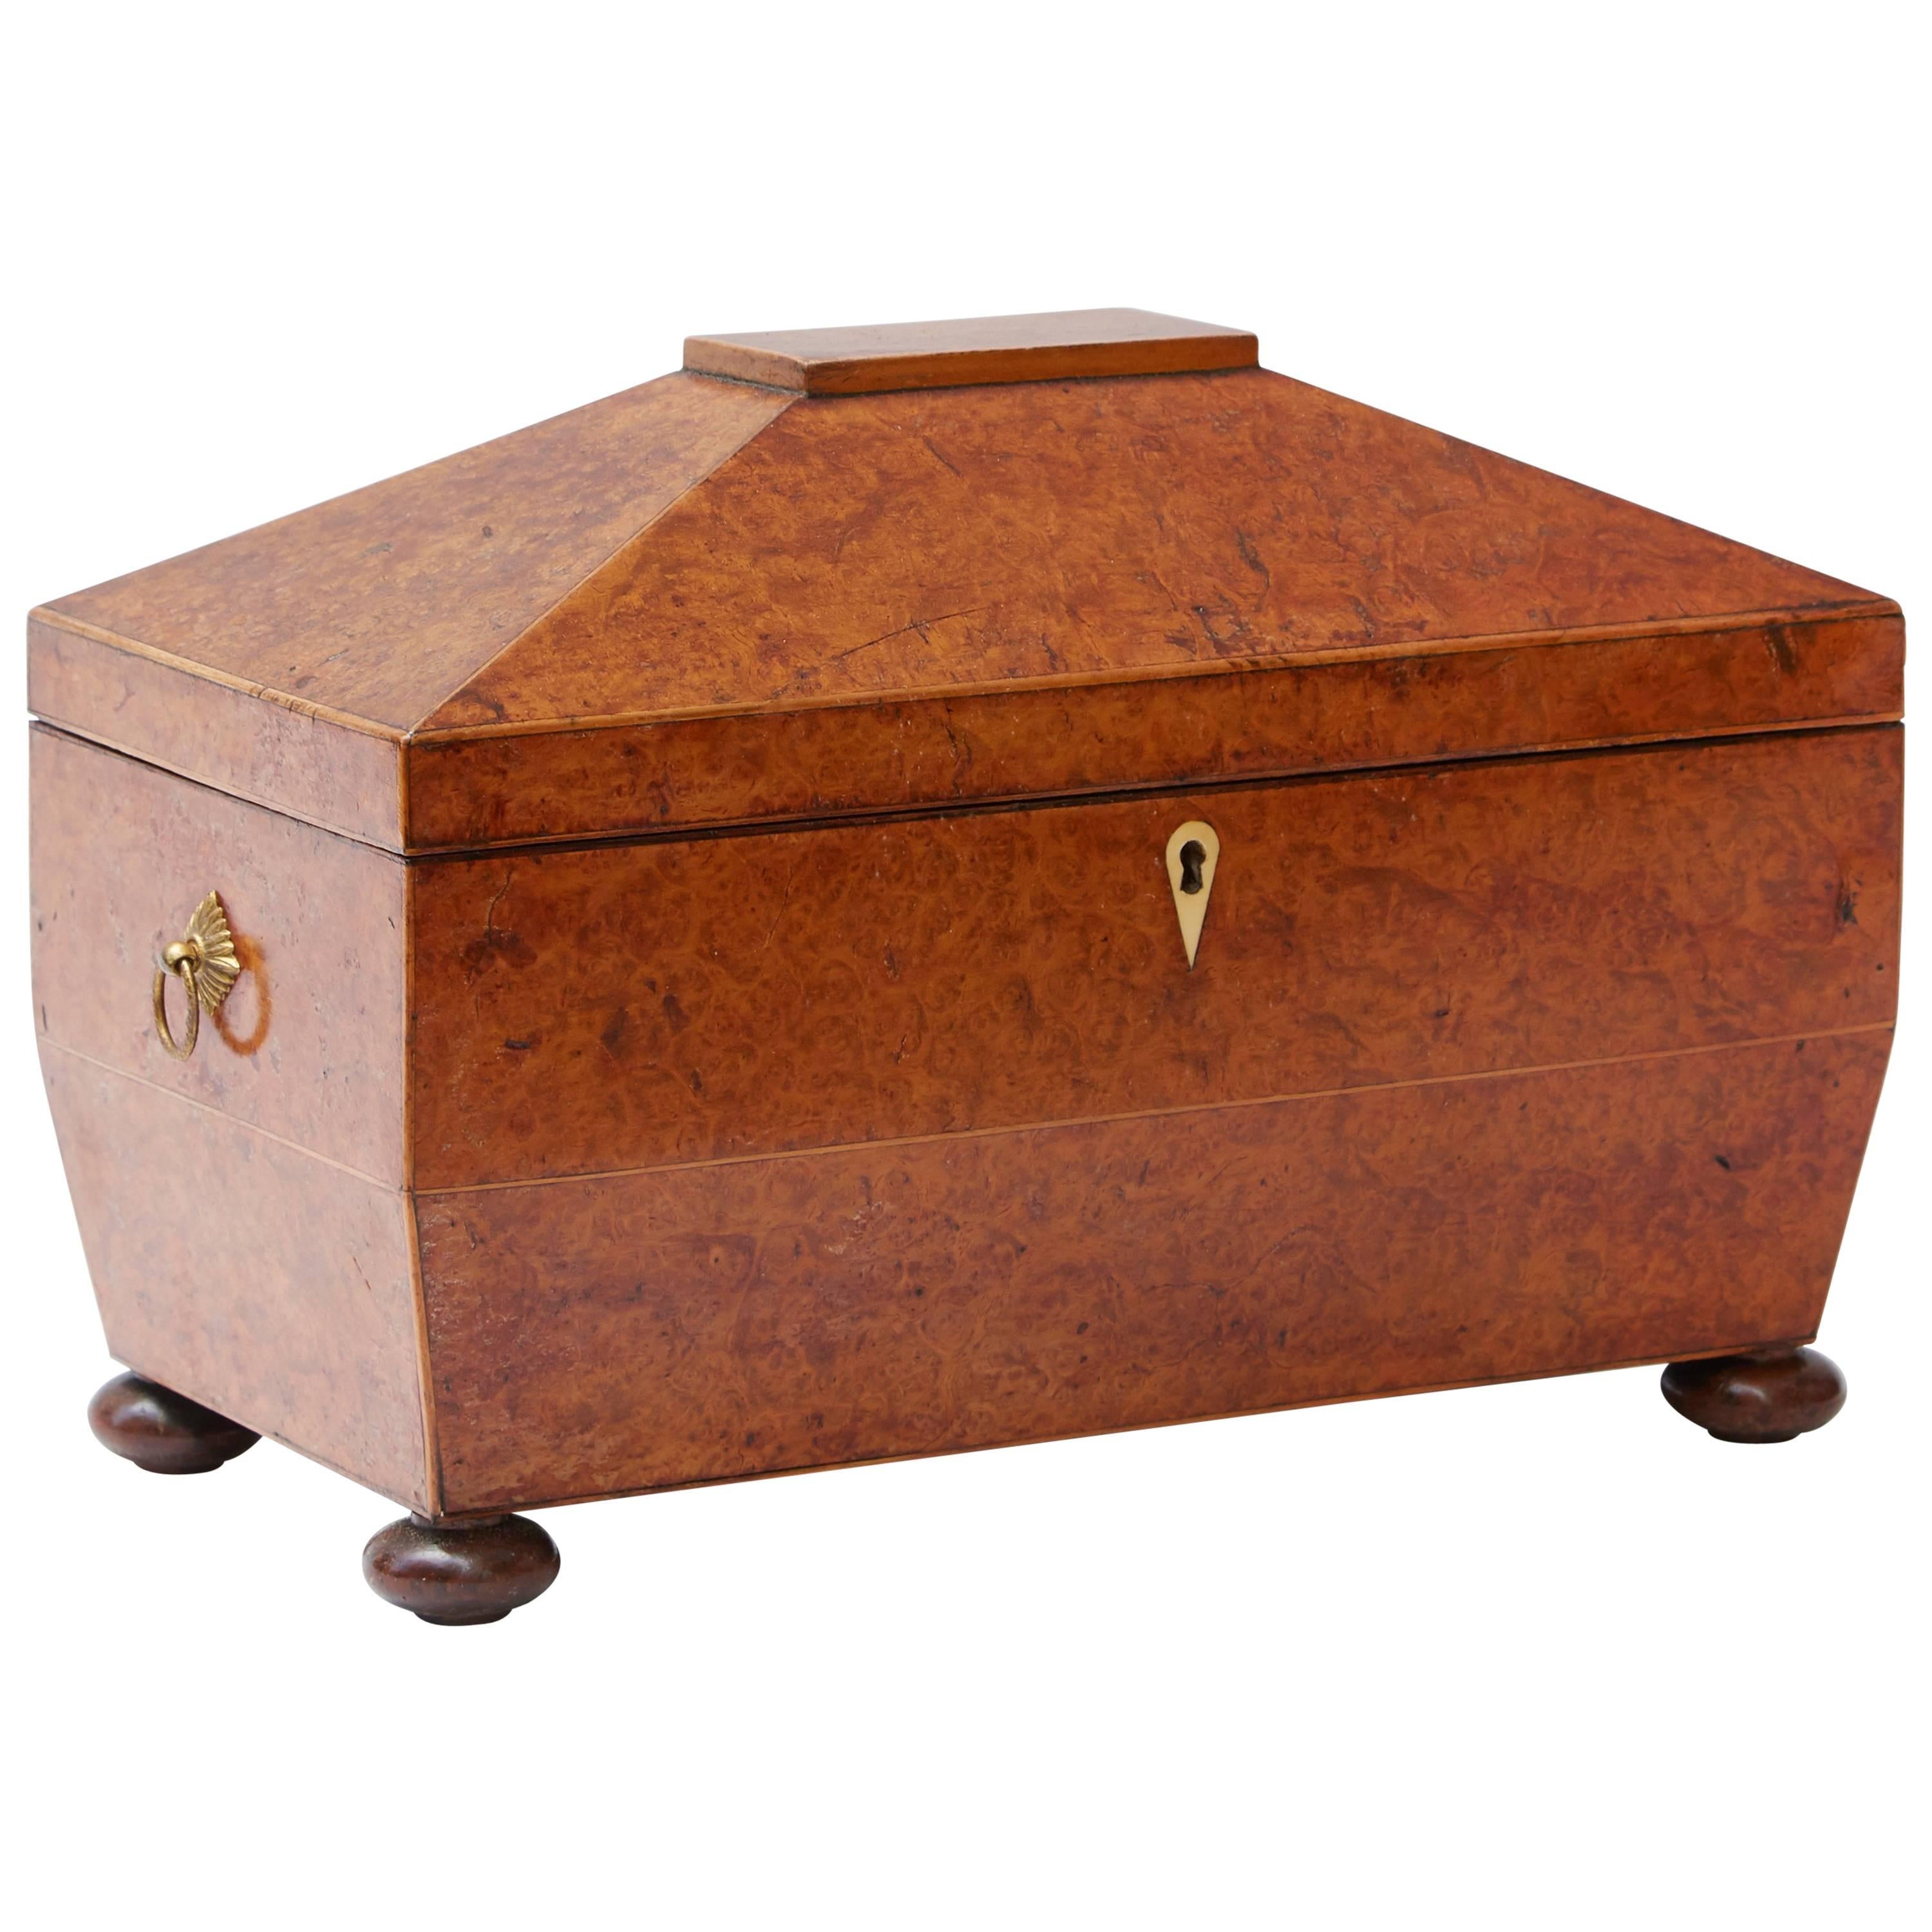 1880s Large Yew Wood English Tea Caddy with Three Compartments 